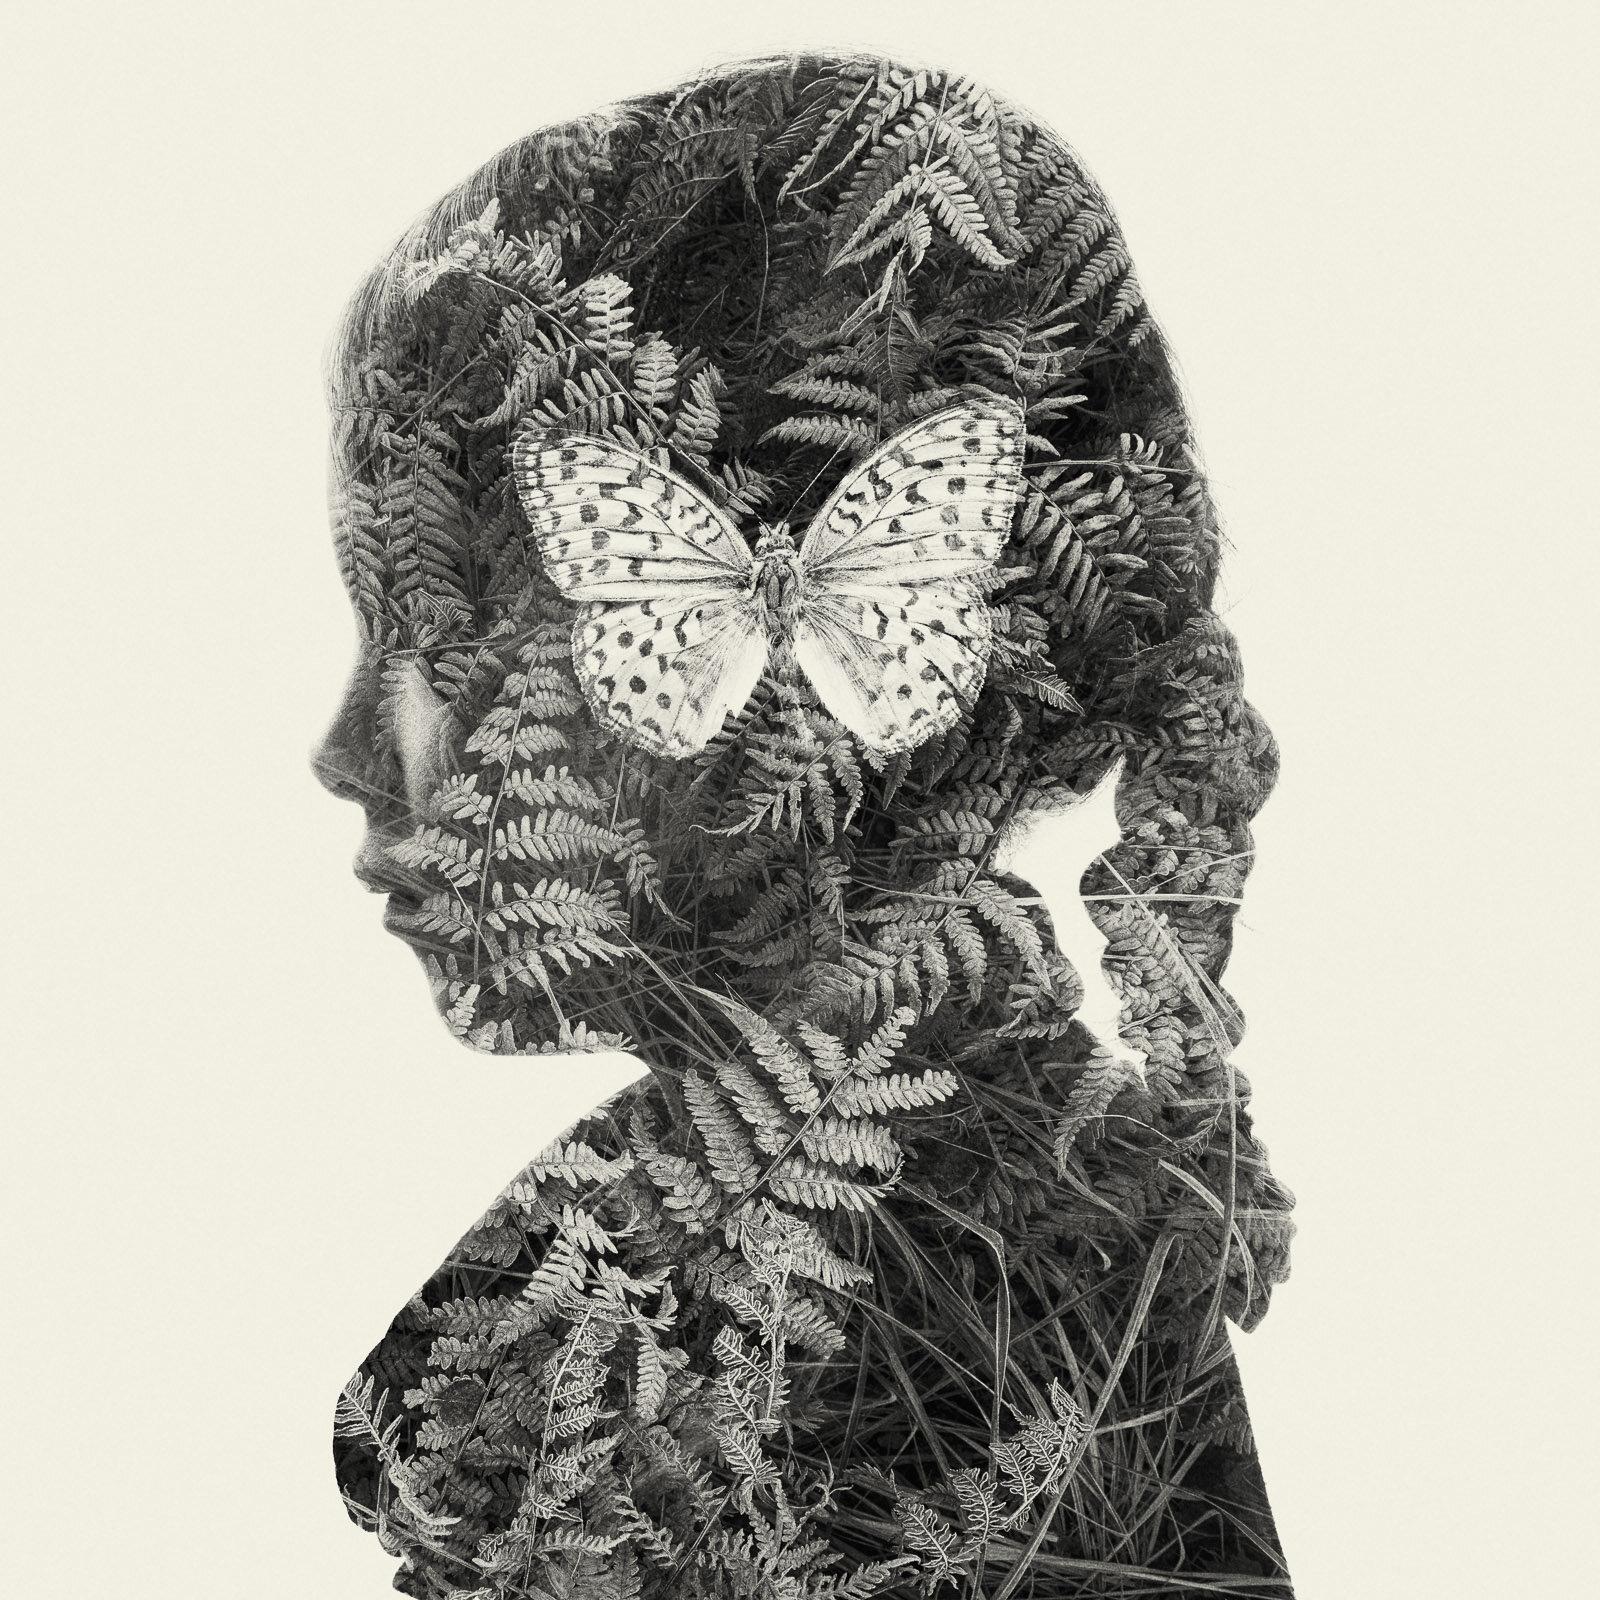 Christoffer Relander Black and White Photograph - Butterfly Mind - black and white portrait and nature multi exposure photograph